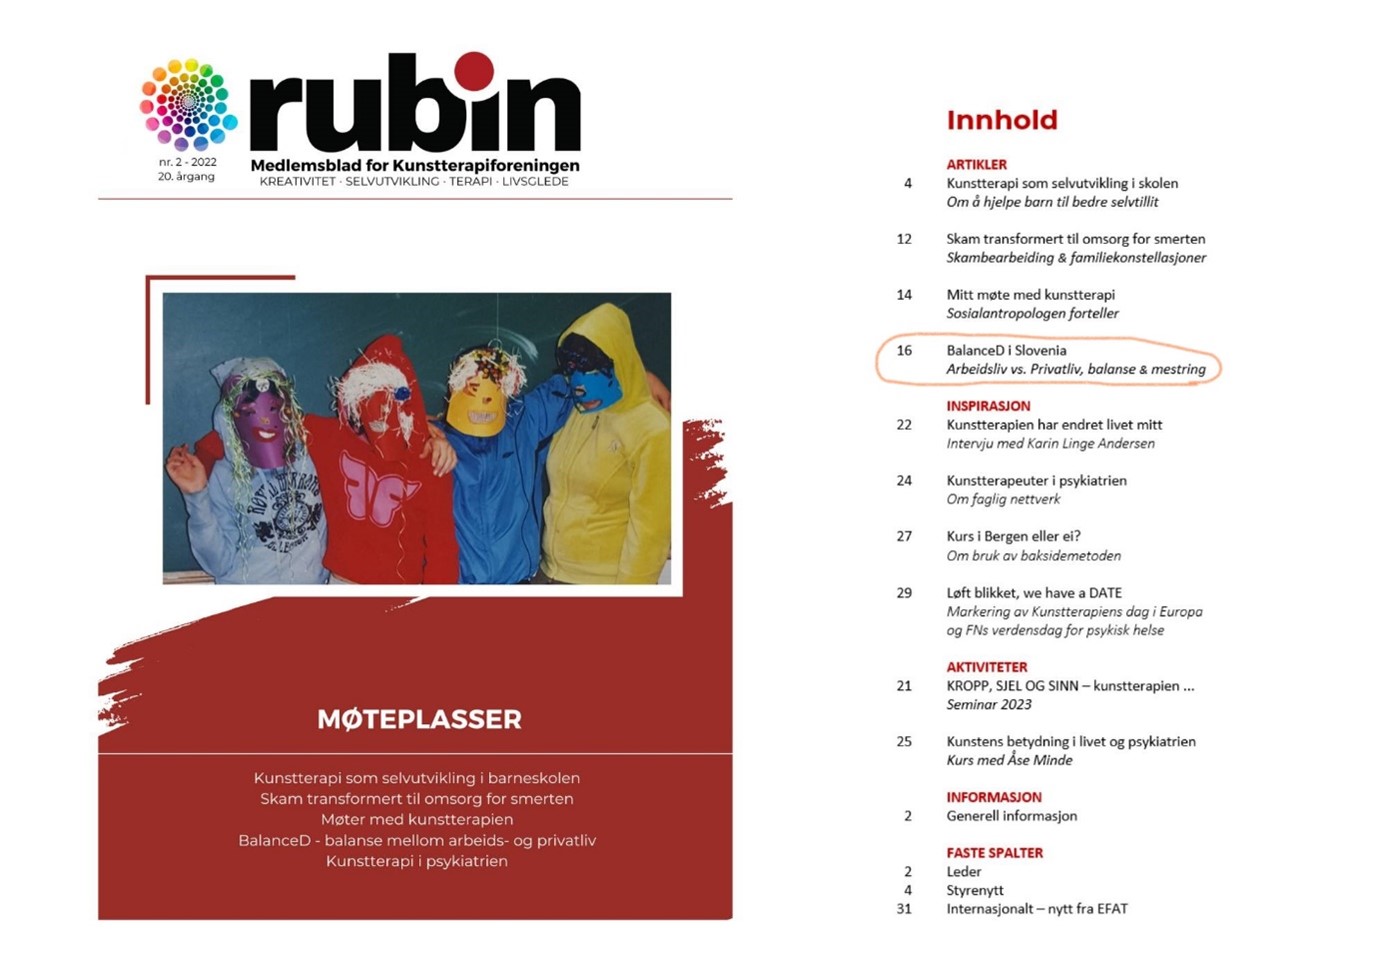 PROJECT HAS BEEN MENTIONED IN THE NORWEGIAN ART THERAPY ASSOCIATION'S MAGAZINE, CALLED RUBIN